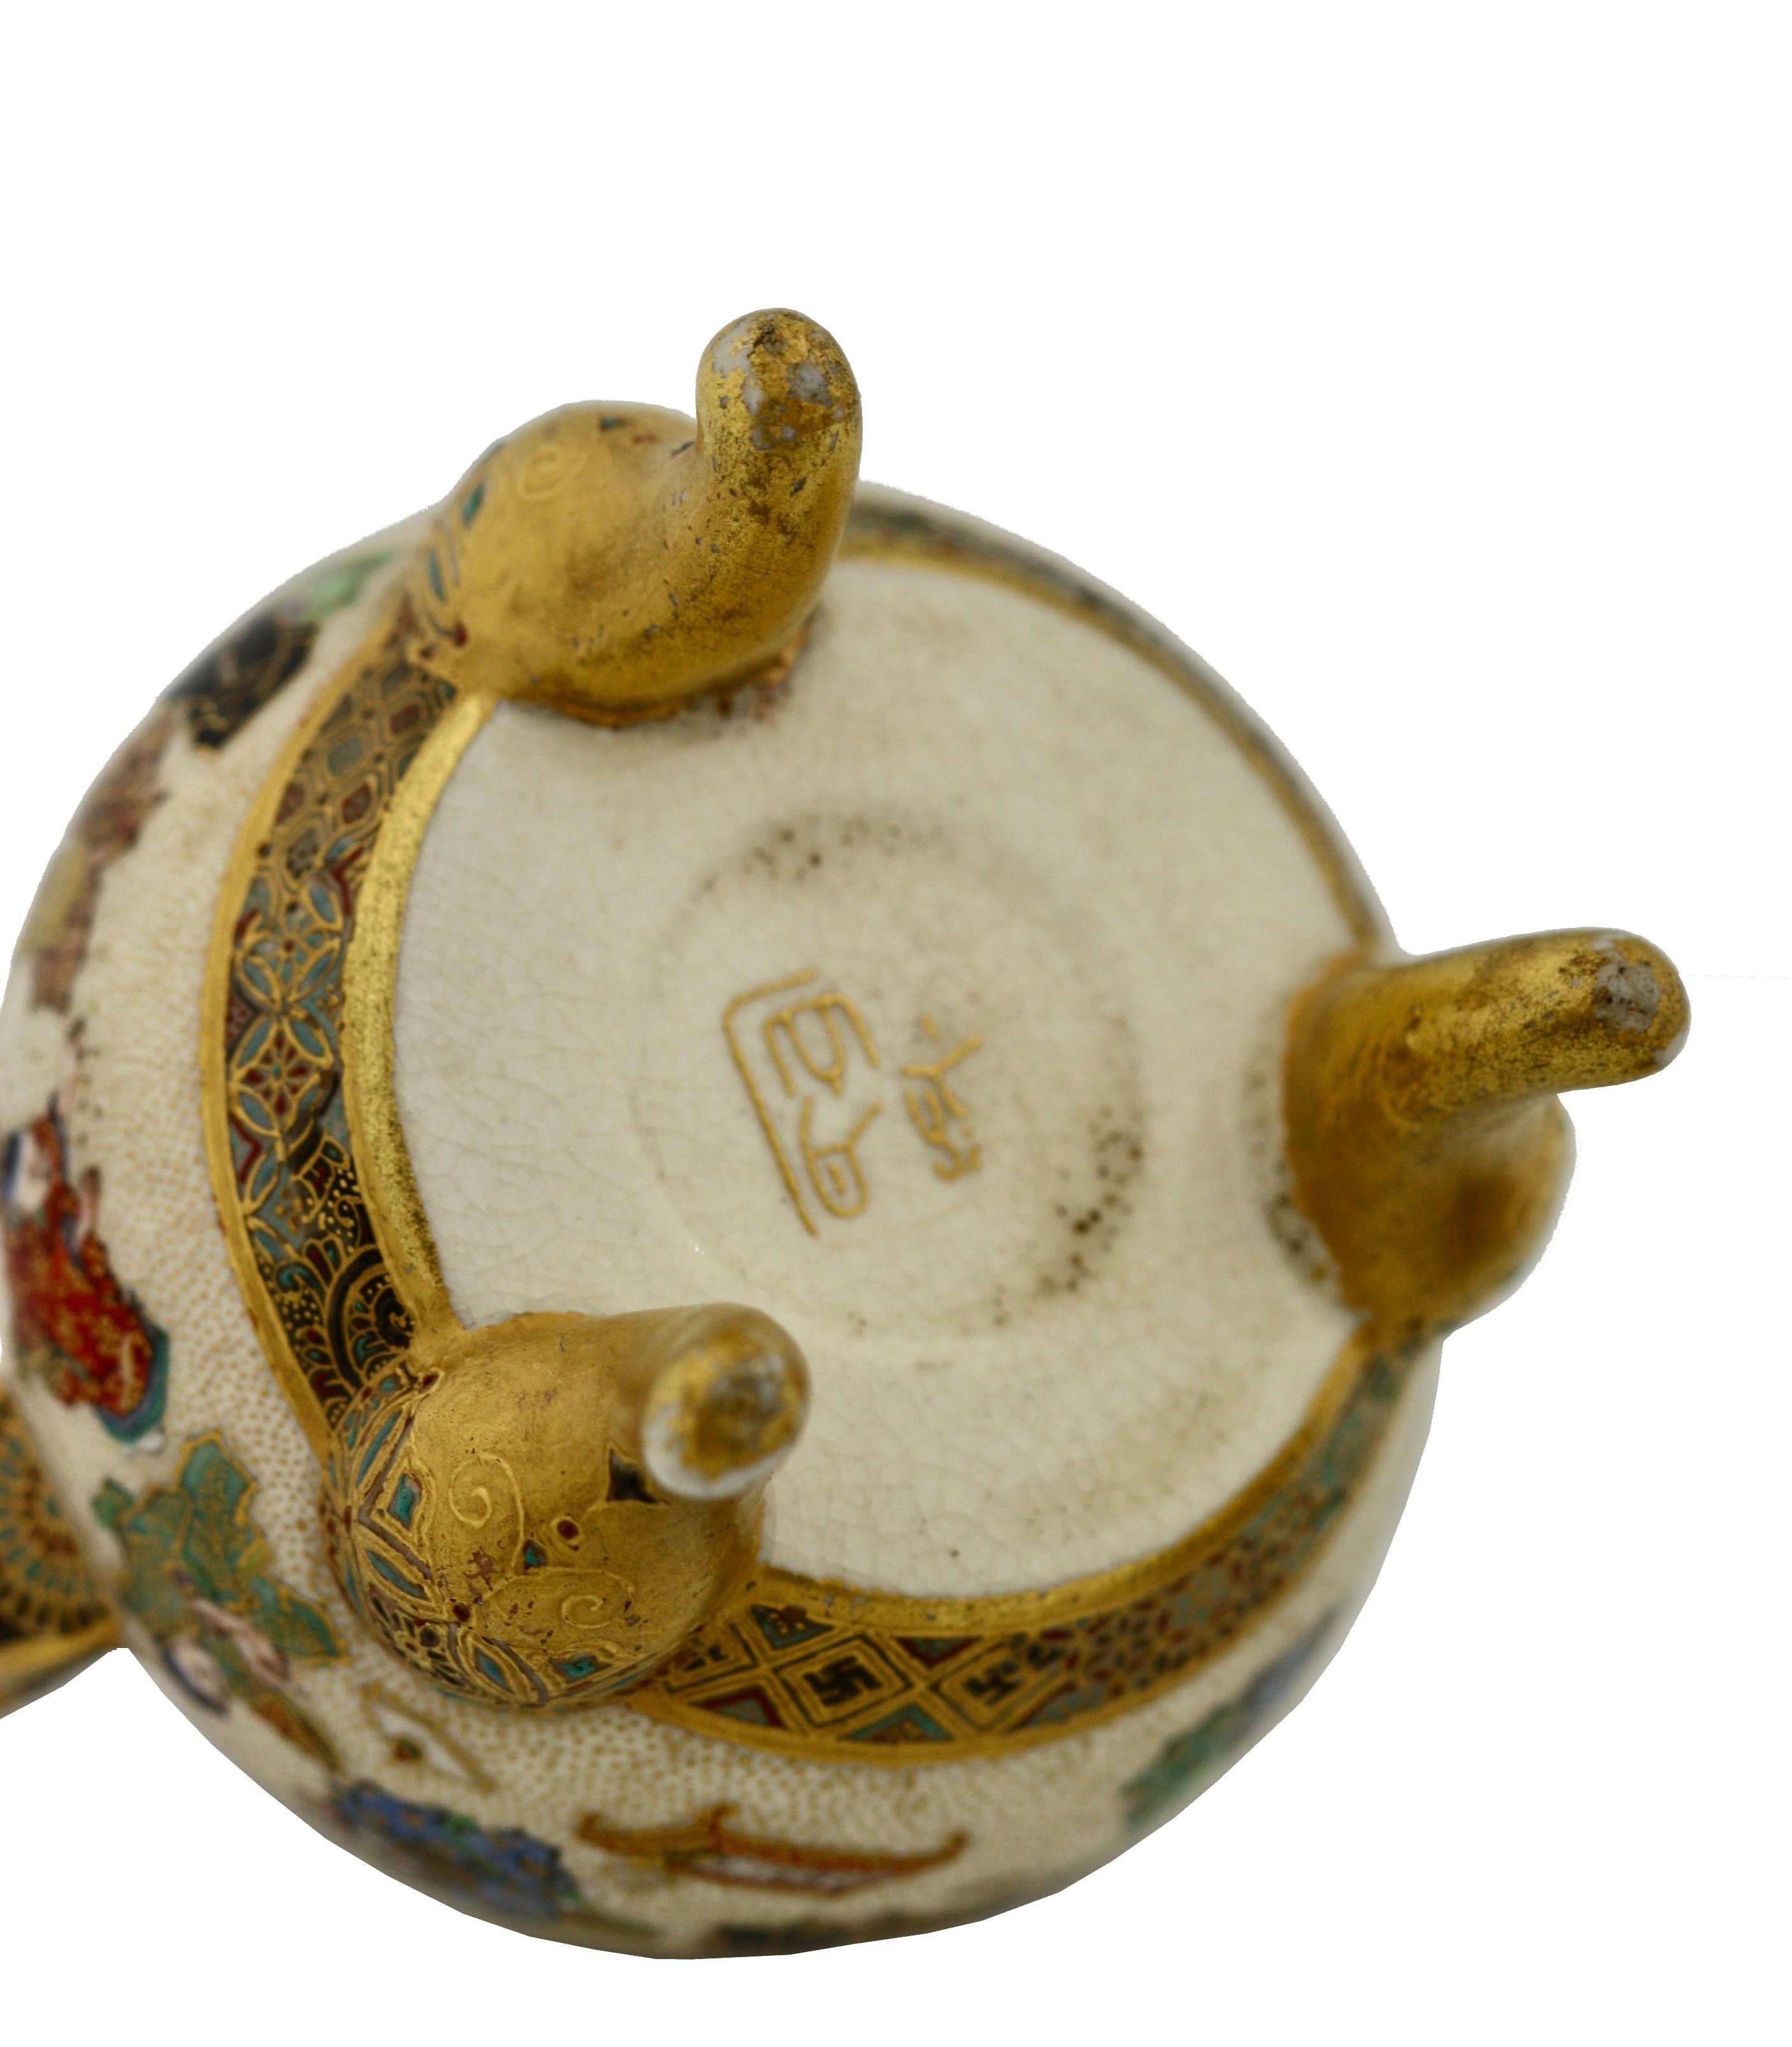 A Satsuma Koro and cover by Yabu Meizan, Osaka, 1853-1934, delicately painted with various scenes of children playing, the top with lion finial, raised on three scrolling feet, with gilt seal Yabu Meizan, height 3 1/2 inches.